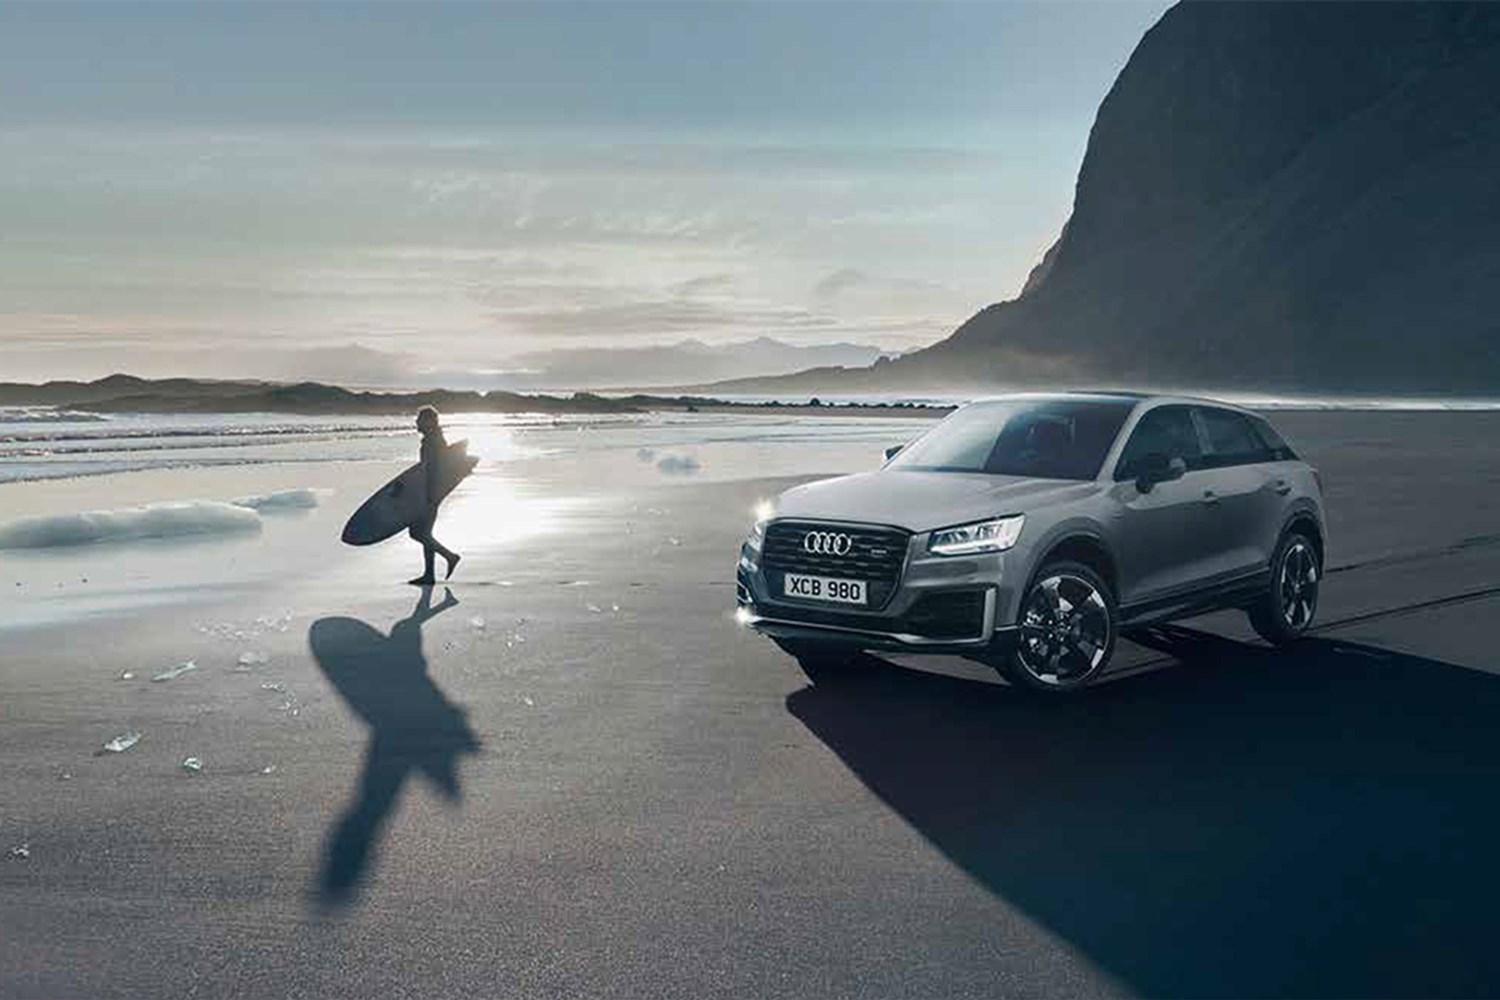 Audi Q5 parked on sandy beach with person walking away from the vehicle and towards the sea with surf board